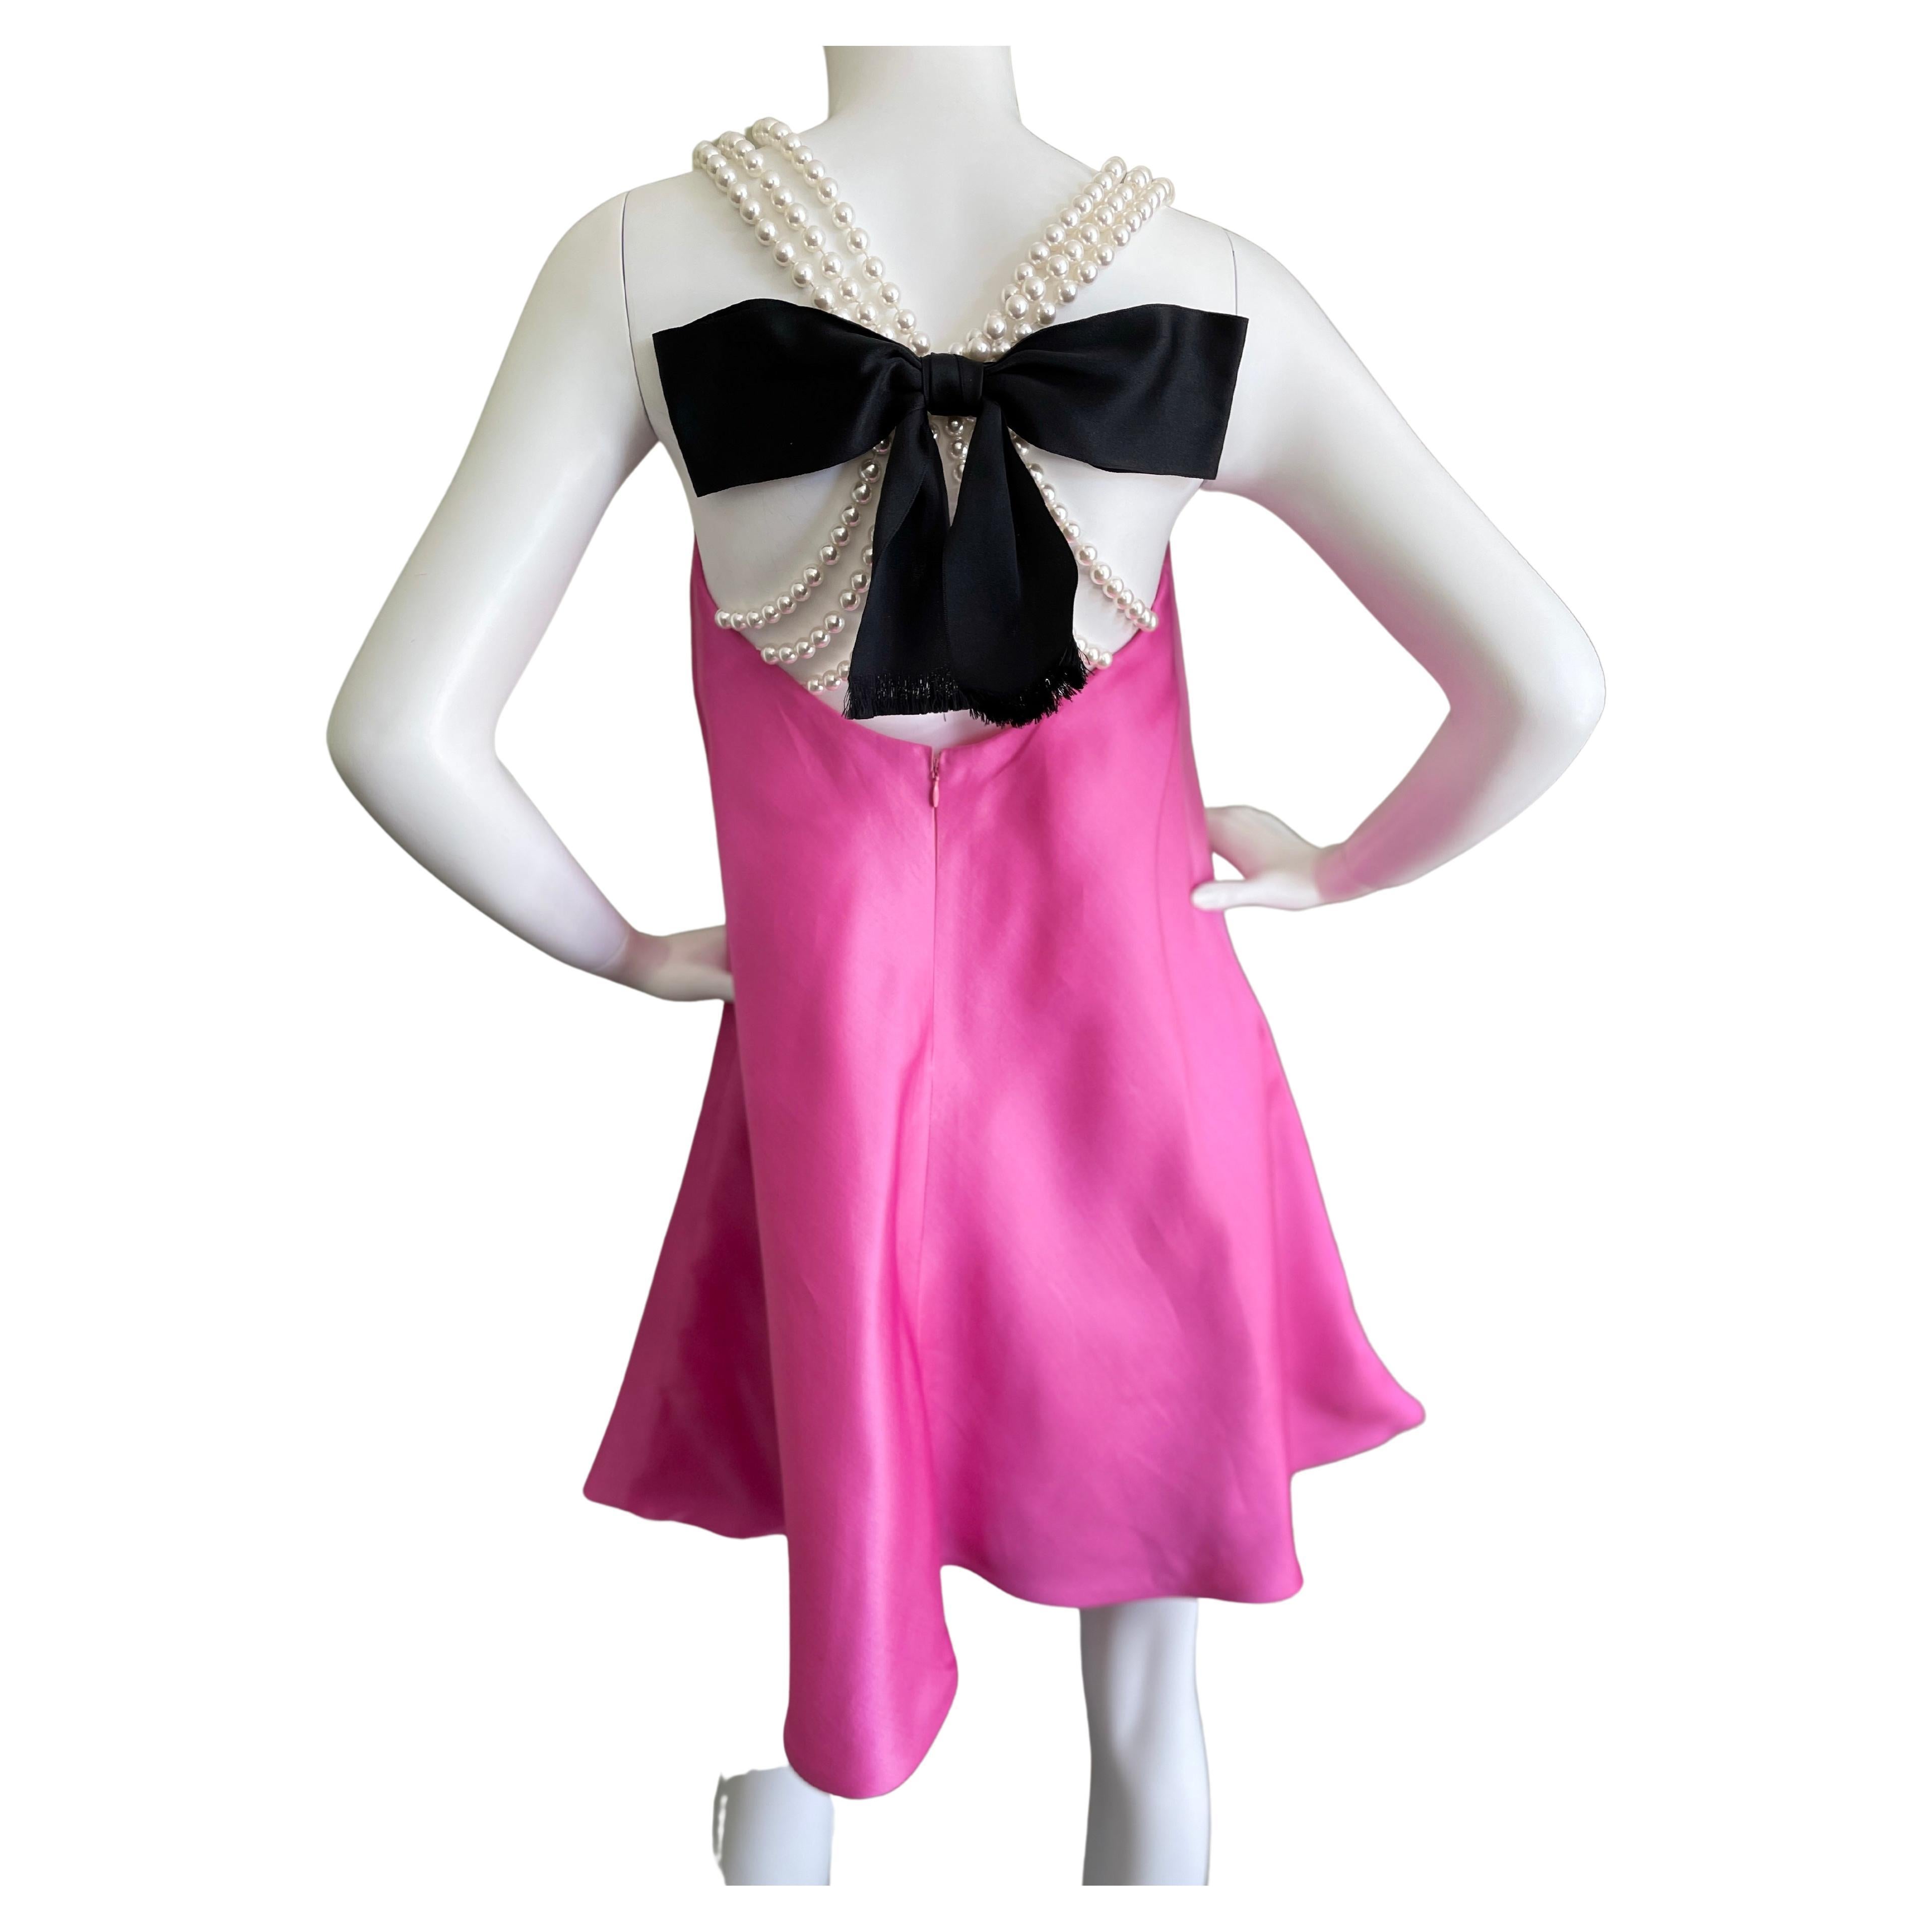 Bill Blass 1980's Pink Silk Party Dress with Pearl Straps and Bow in Back For Sale